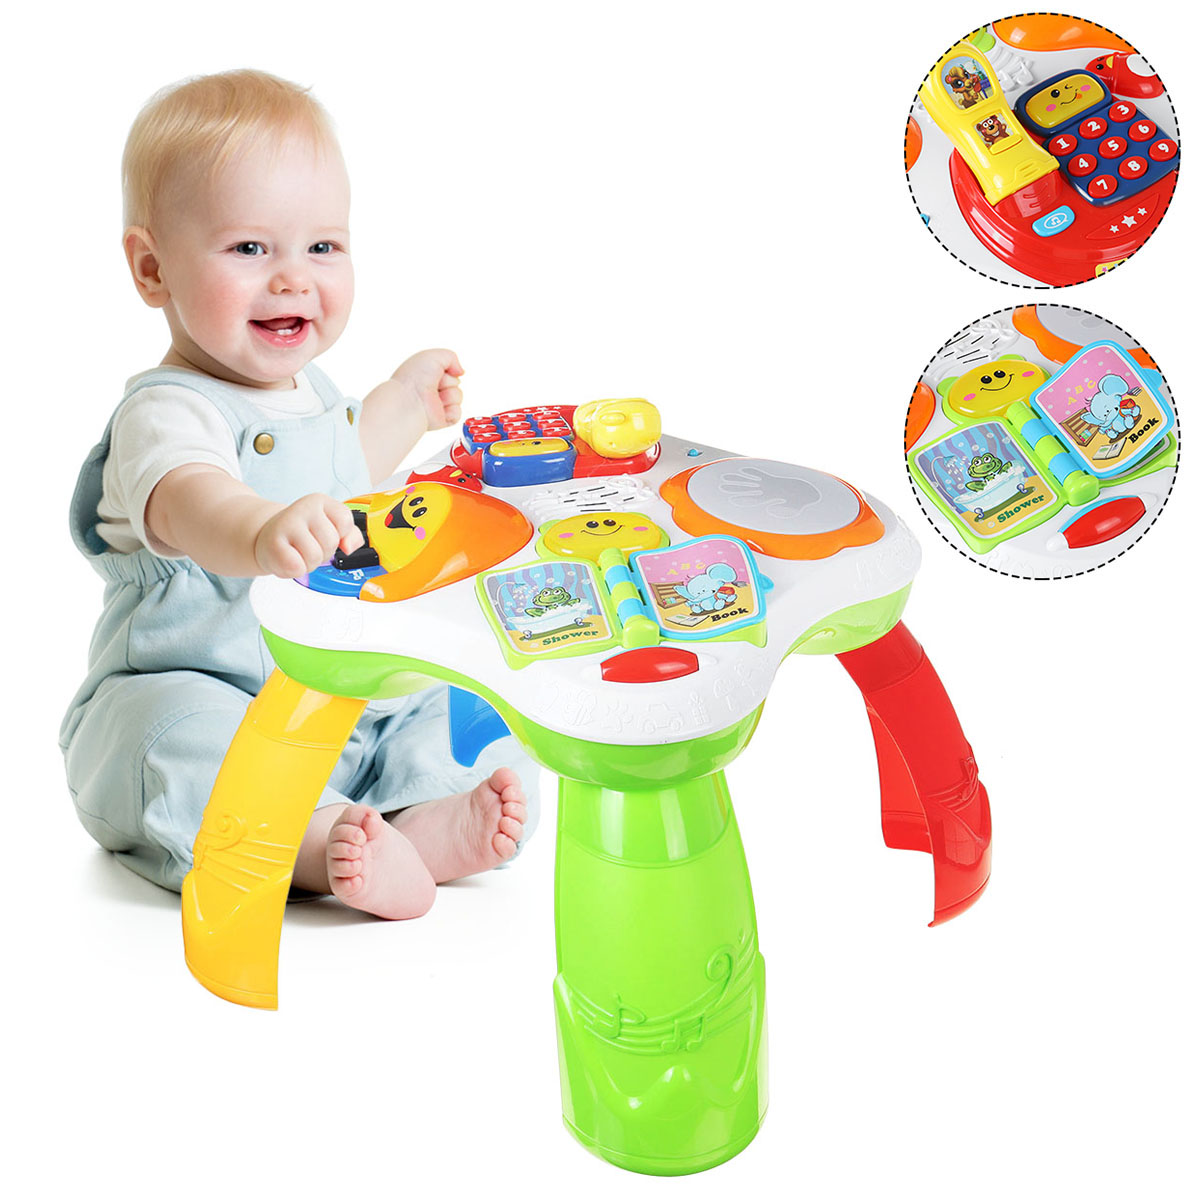 Activity-Table-For-1-Year-Old-And-Up--2-In-1-Baby-Standing-Activity-Center-Table-1697211-1